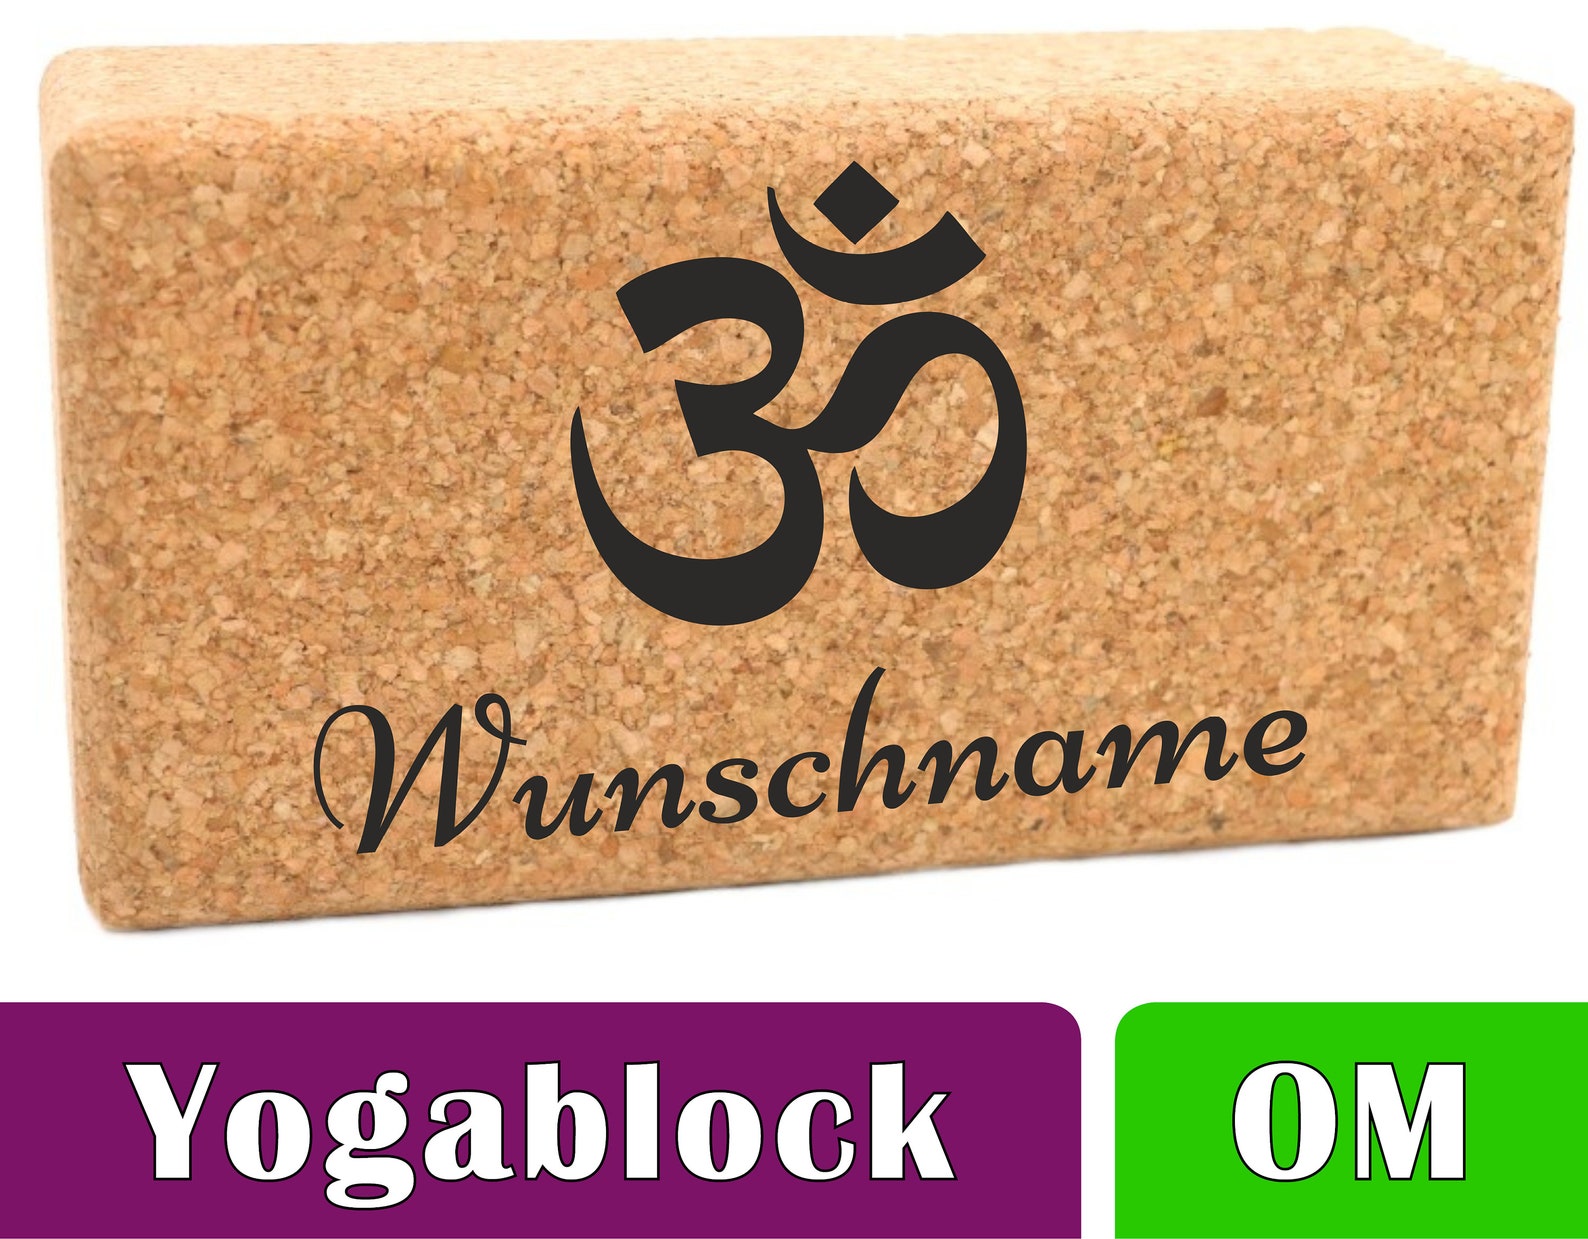 Personalized Yoga Block for Yogis